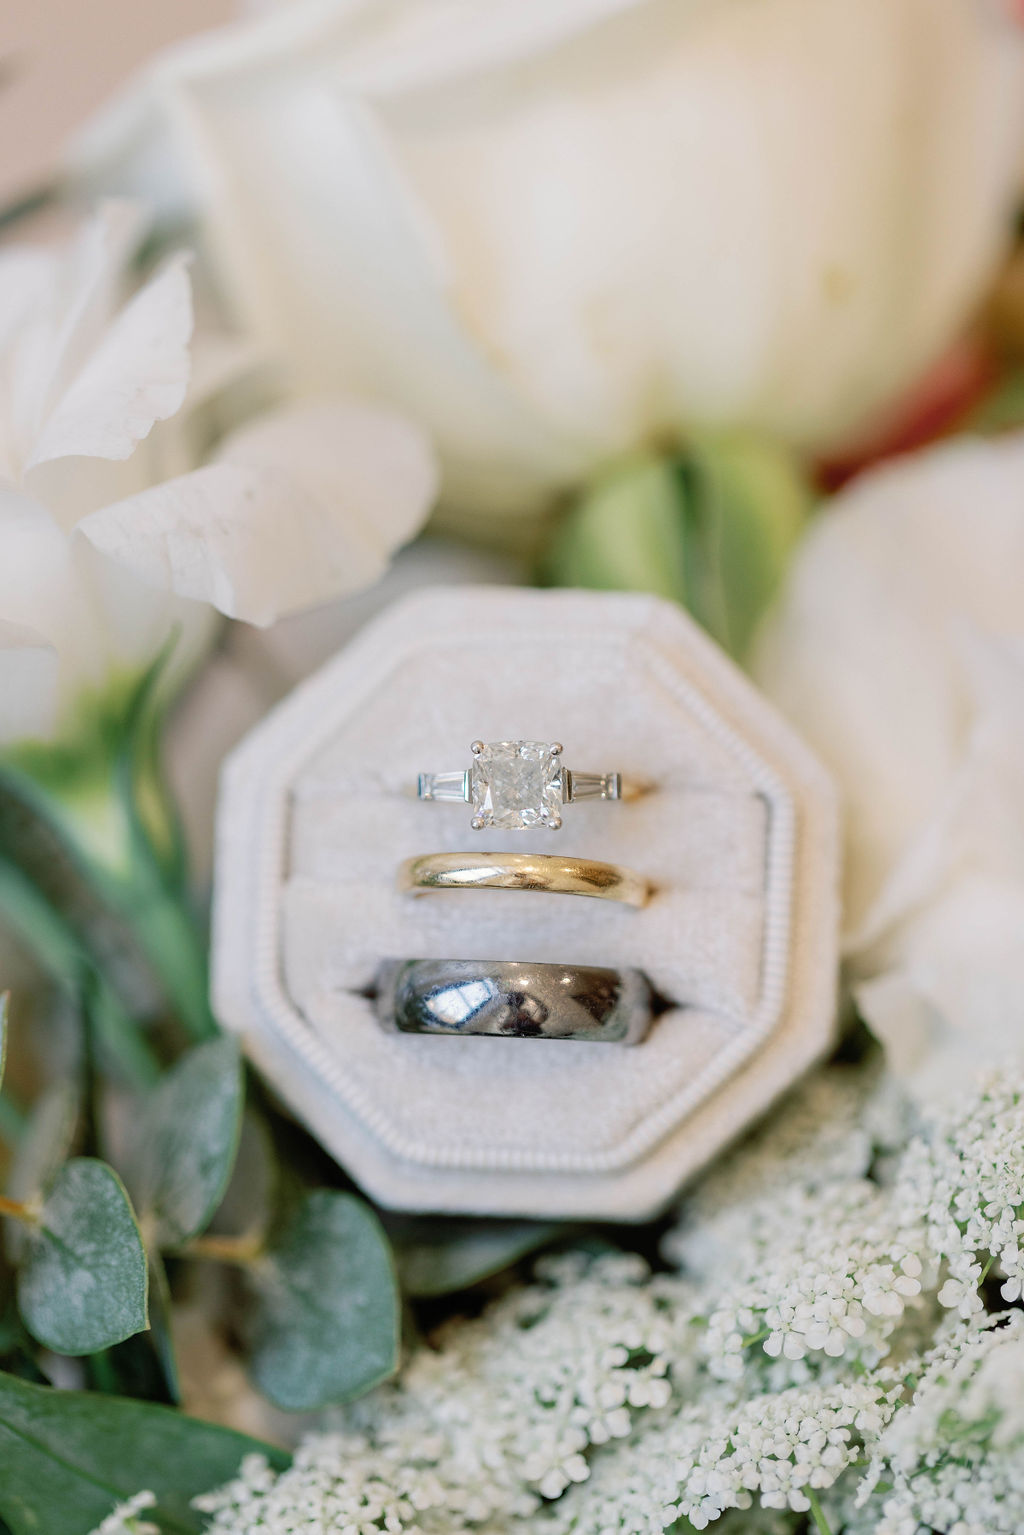 Engagement ring and weddings rings photo by Sarah Block Photography